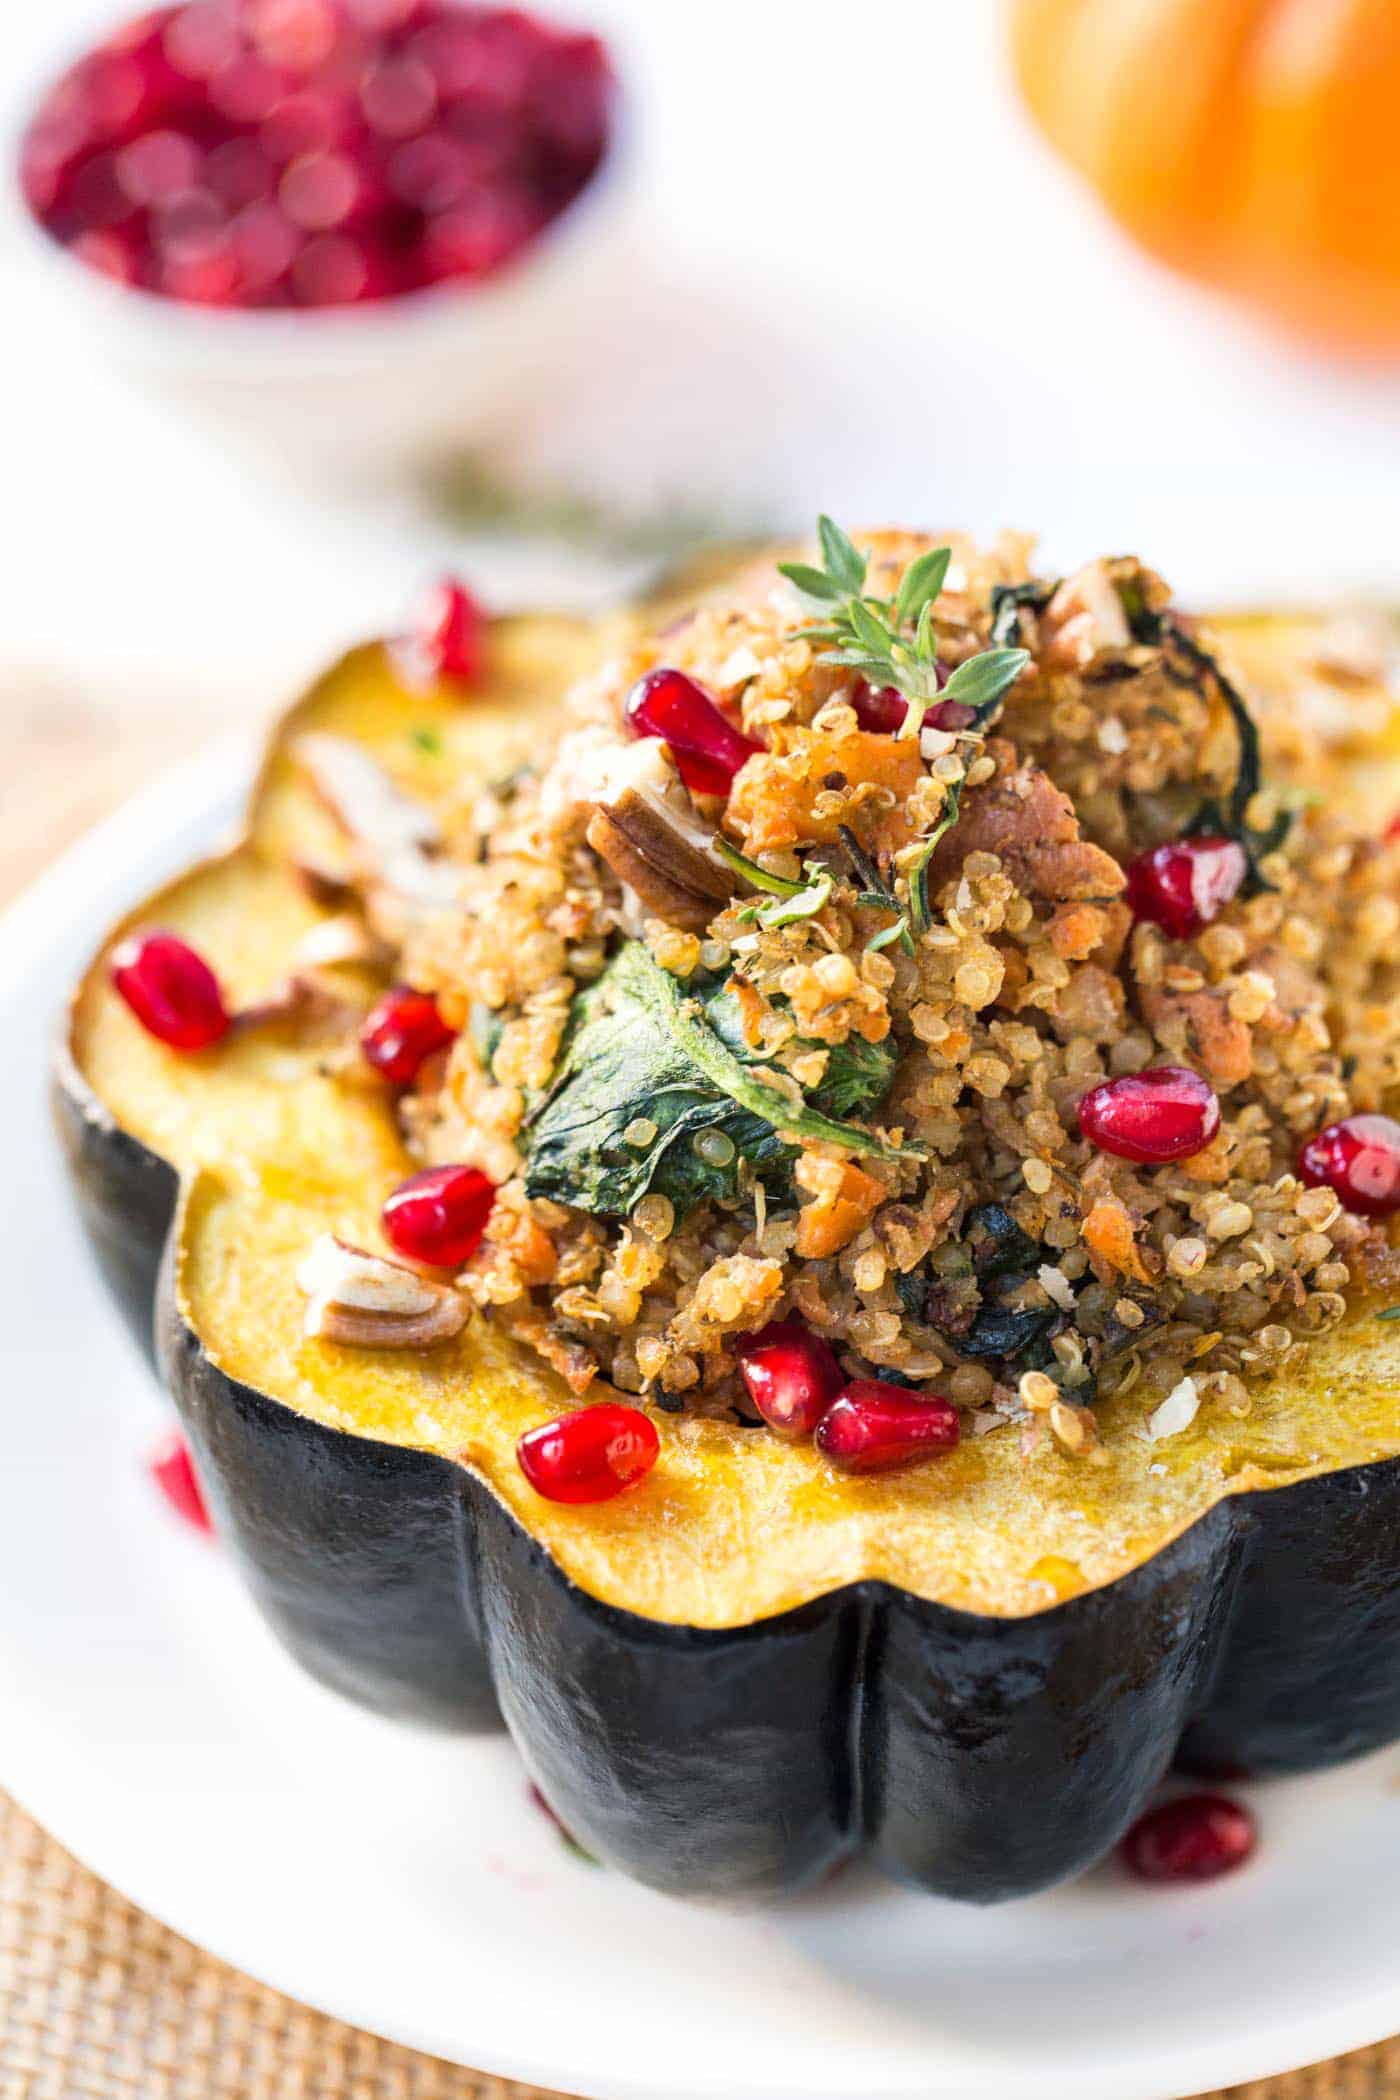 Mushroom & Quinoa Stuffed Acorn Squash with pomegranates and pecans! The perfect winter dish that is packed with plant-based goodness and super easy to prepare [vegan]